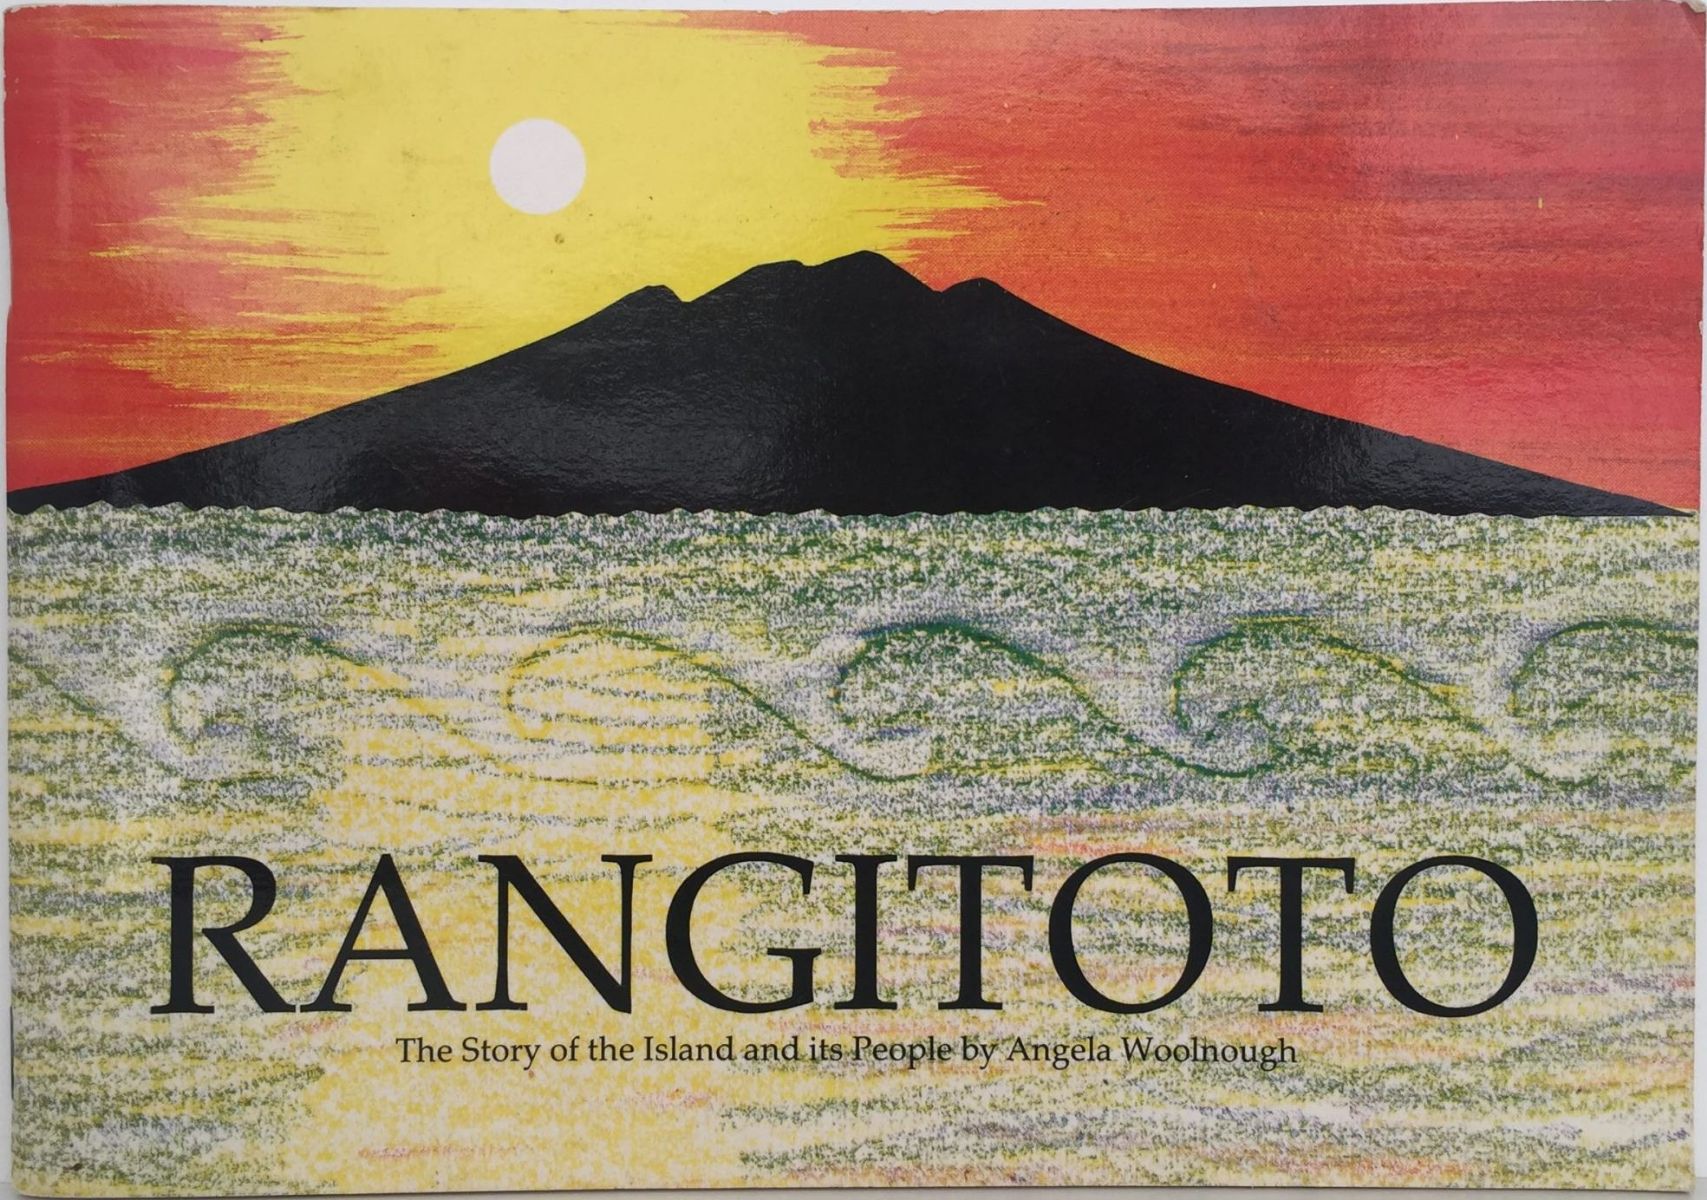 RANGITOTO: The Story of the Island and Its People